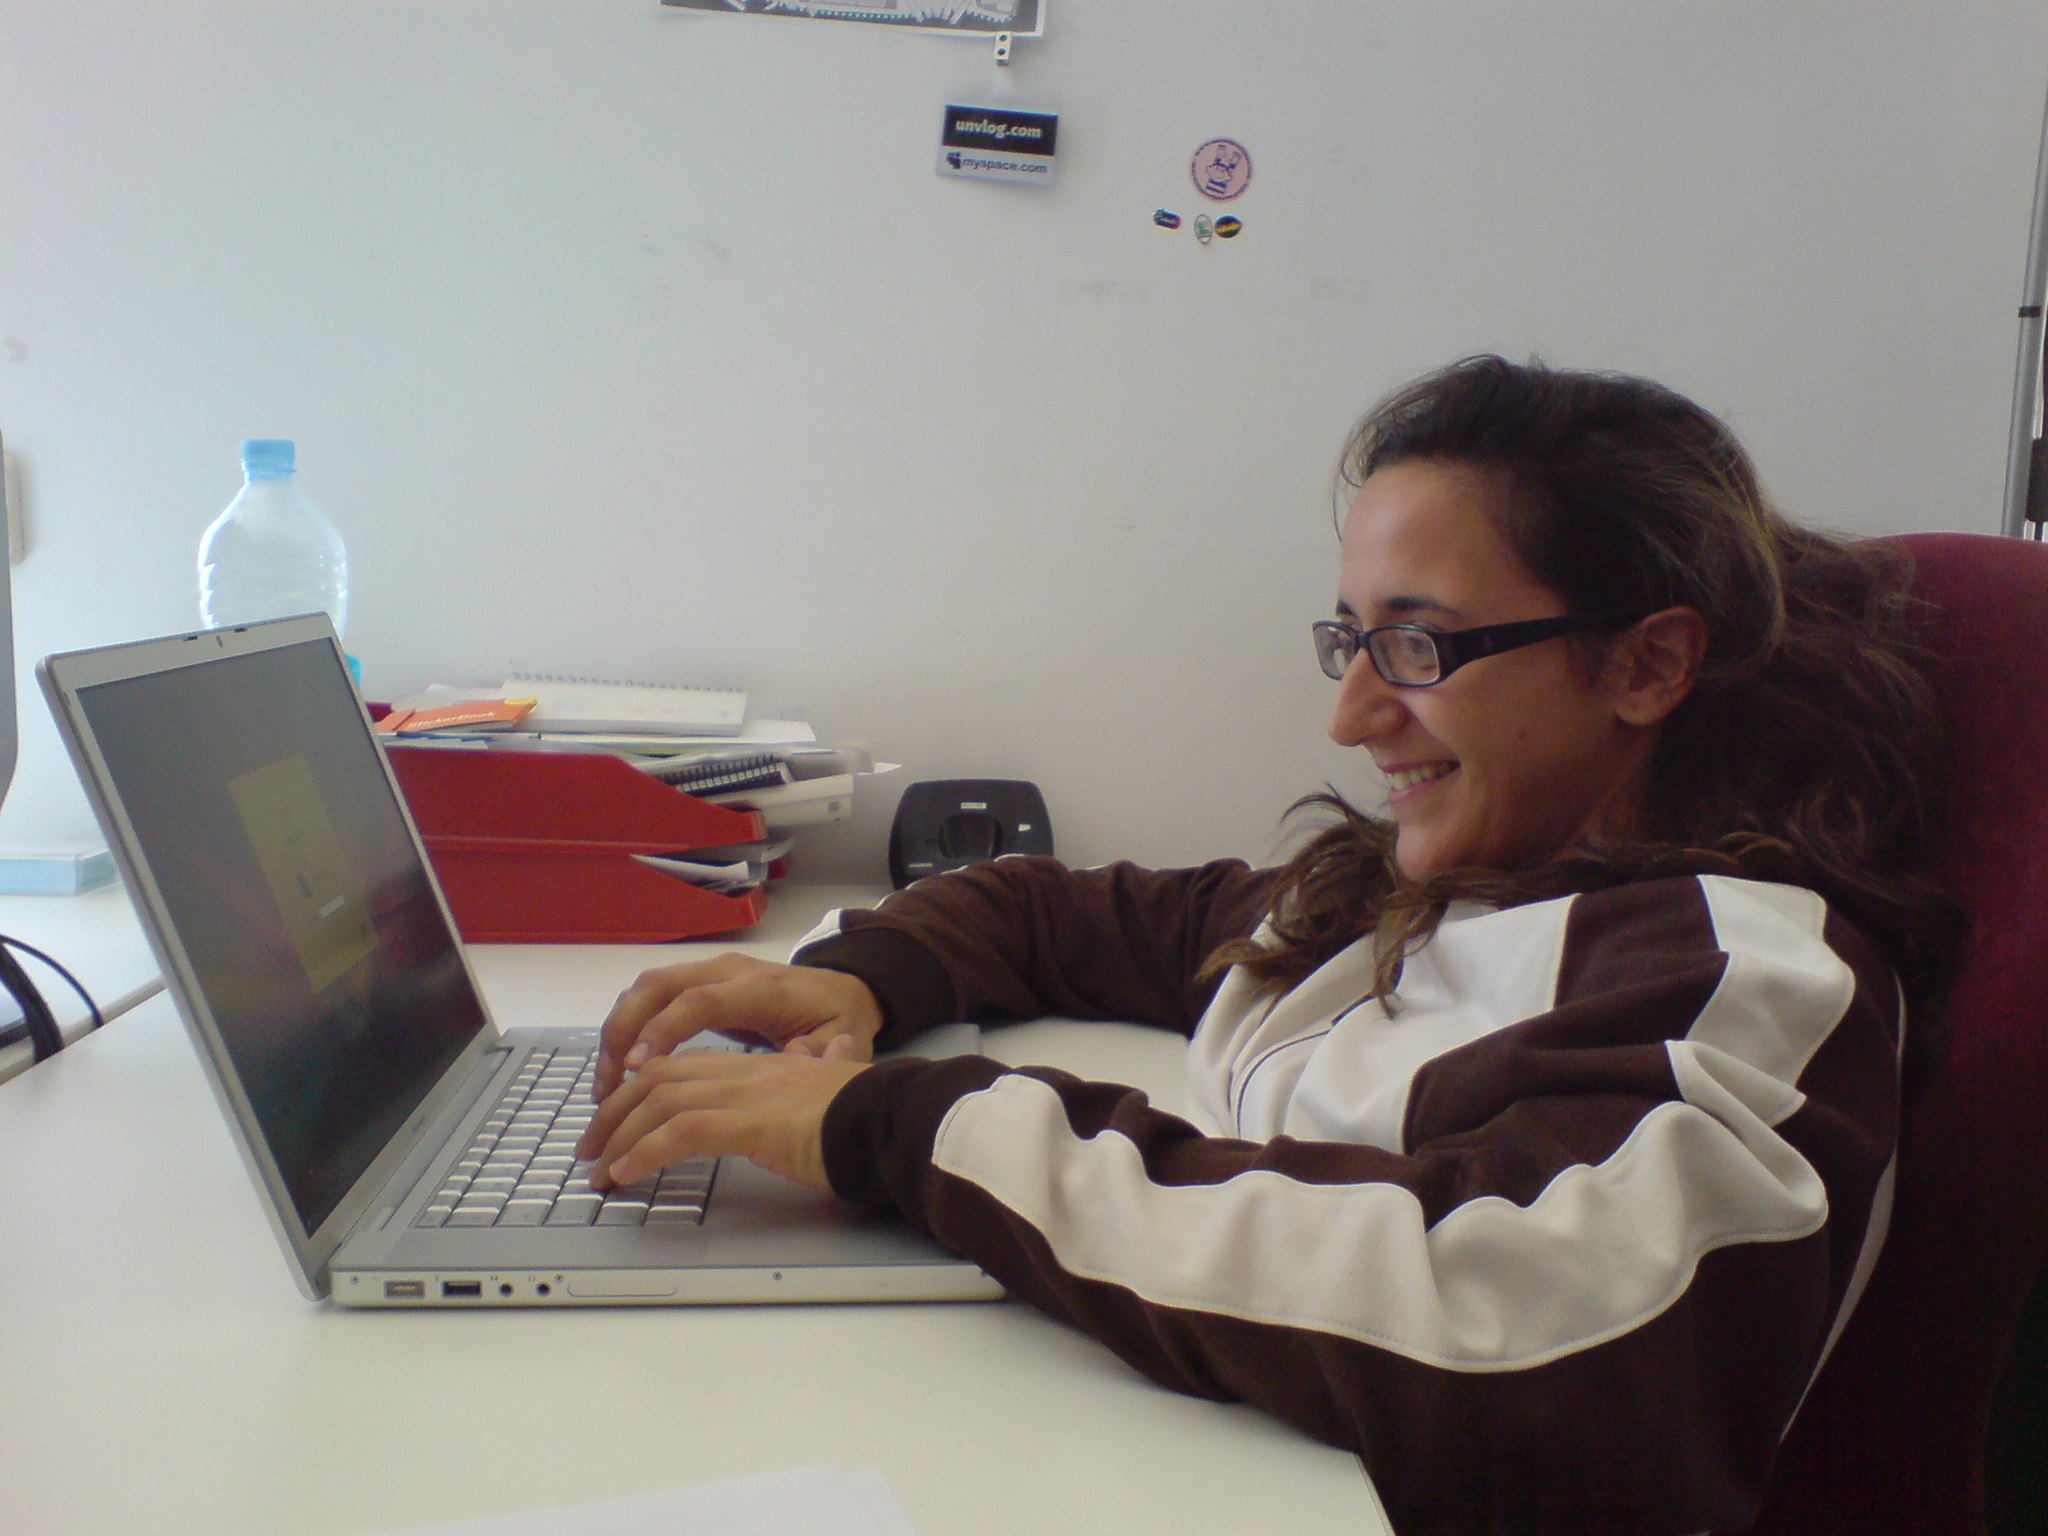 a girl with glasses working on her laptop computer